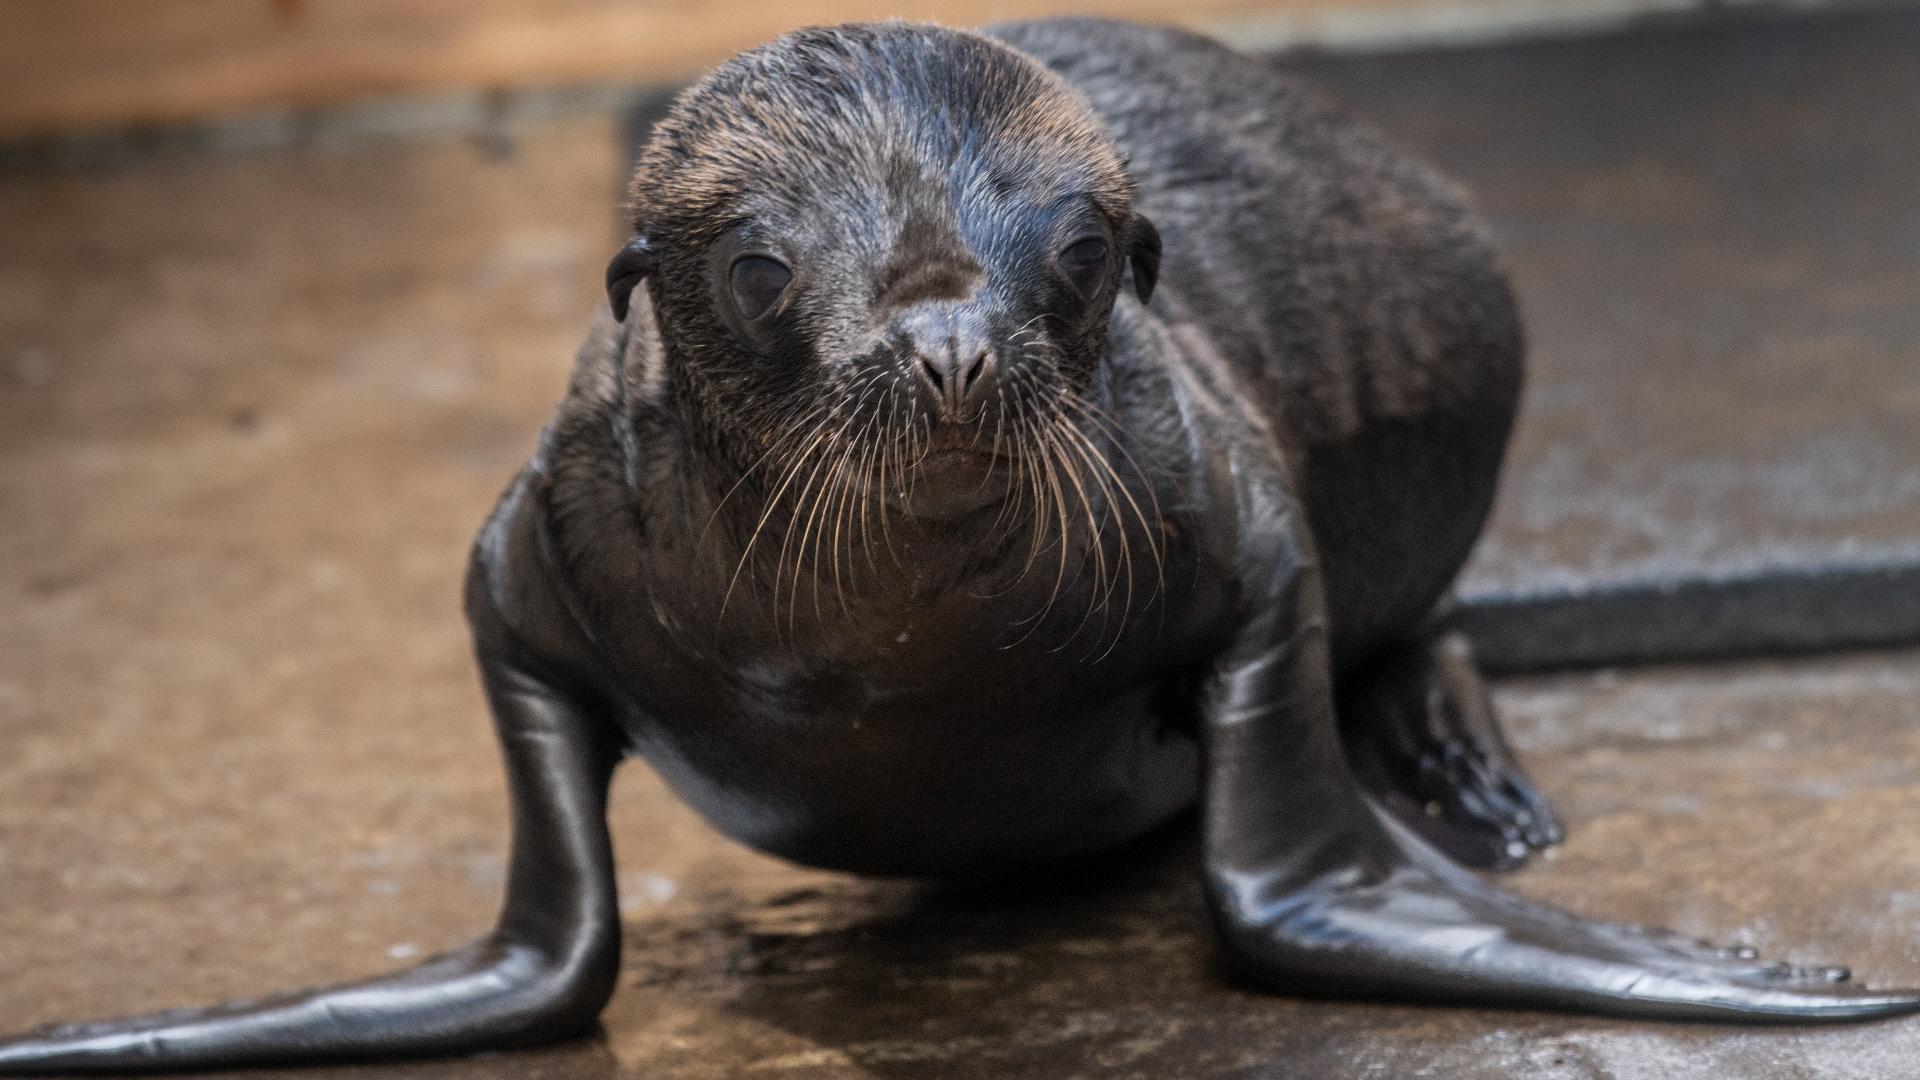 First sea lion pup born at Point Defiance Zoo & Aquarium in its 119-year history.